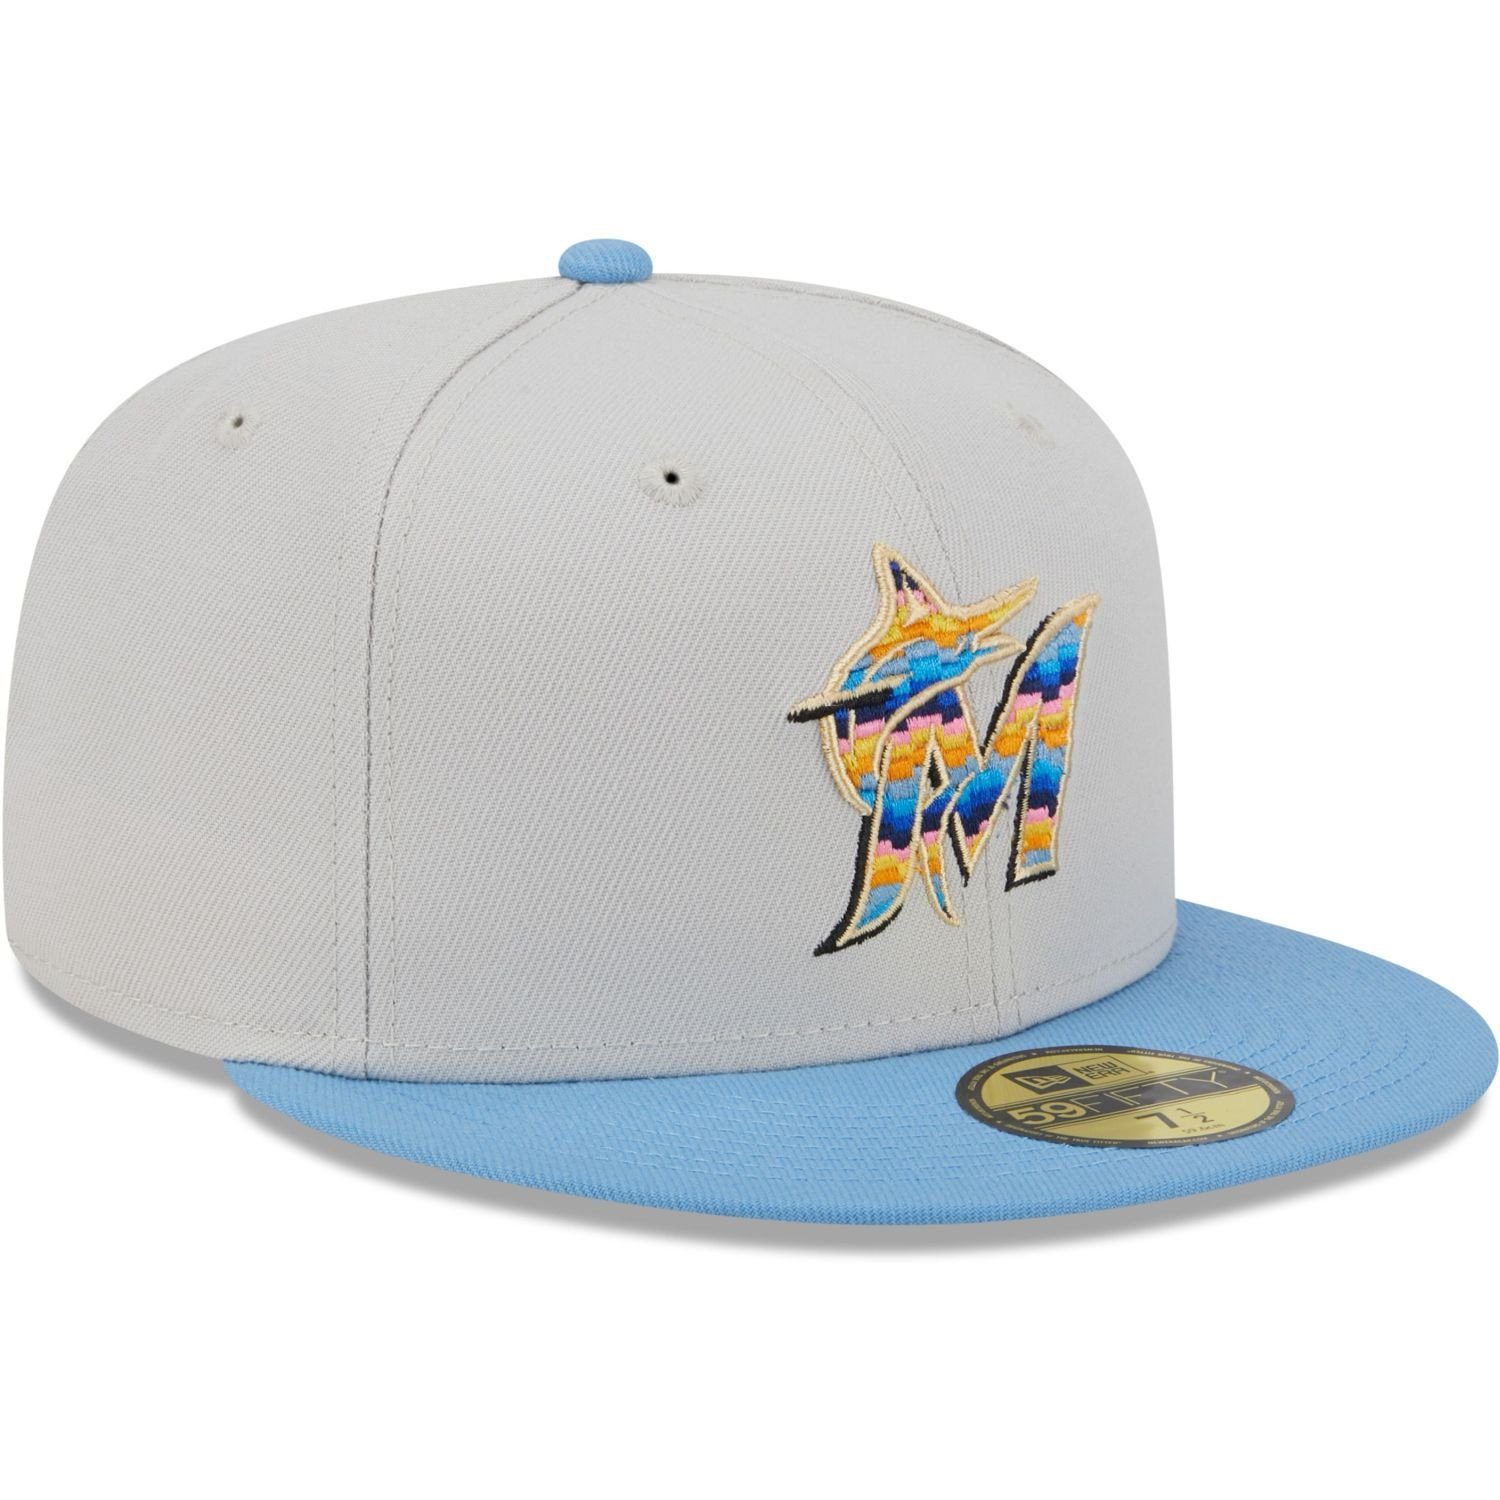 New Fitted Marlins Miami Era BEACHFRONT Cap 59Fifty